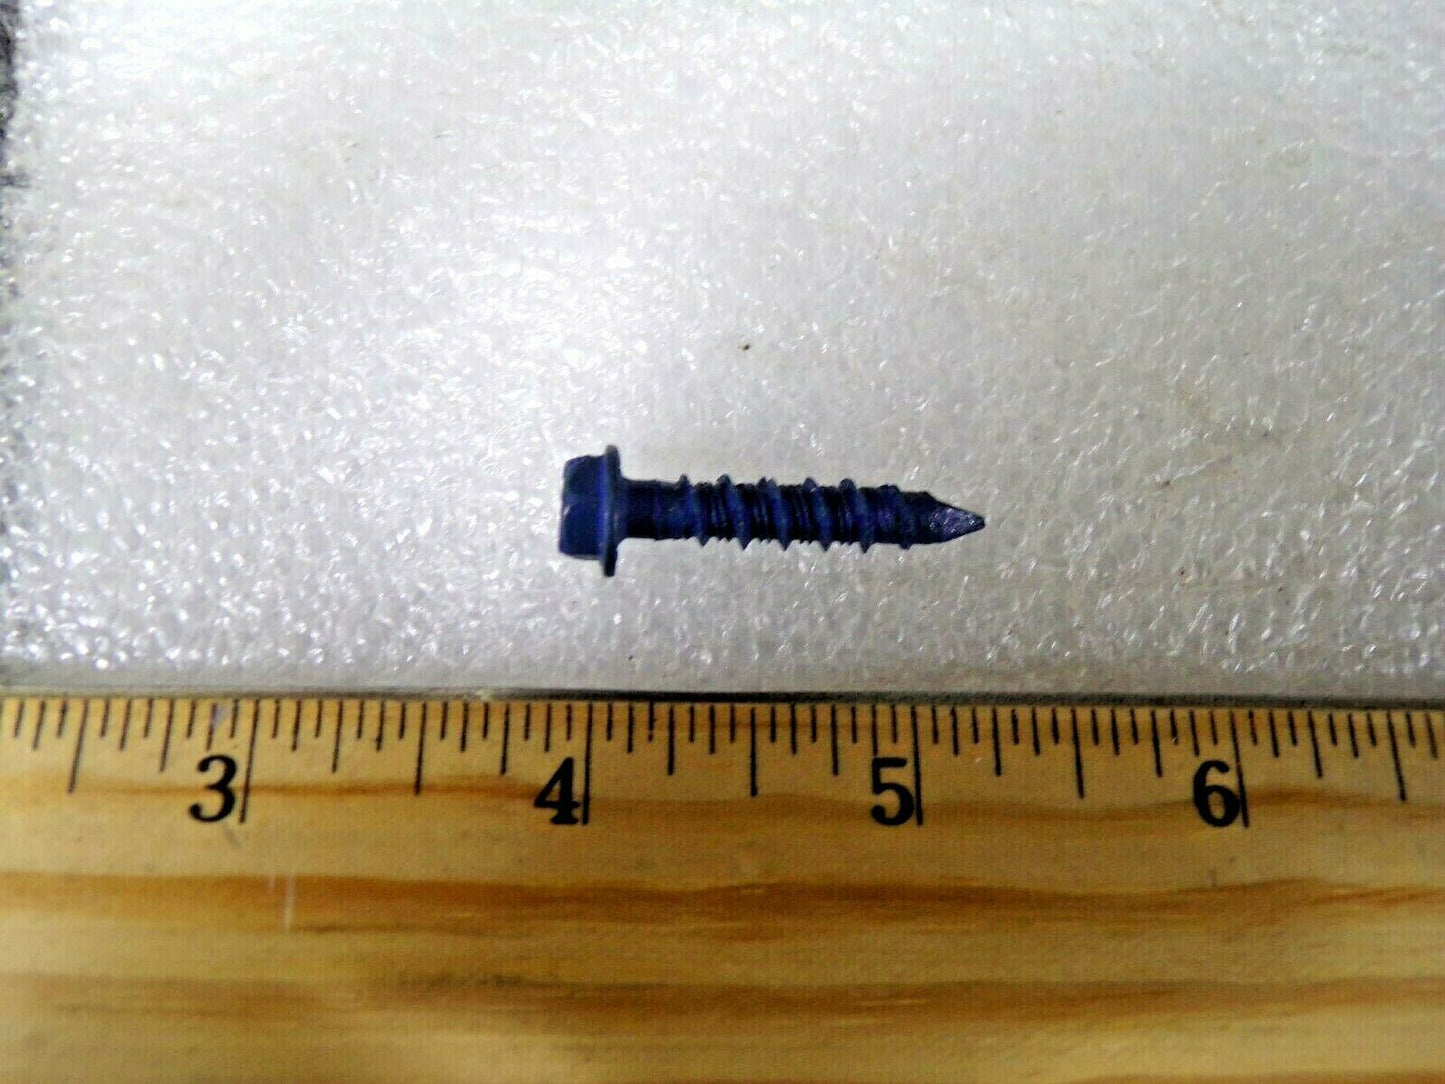 100, Hex Washer Slotted Concrete Screw, 1/4" Dia. x 1-1/4", Blue Climaseal, (184041314935-NBT41)